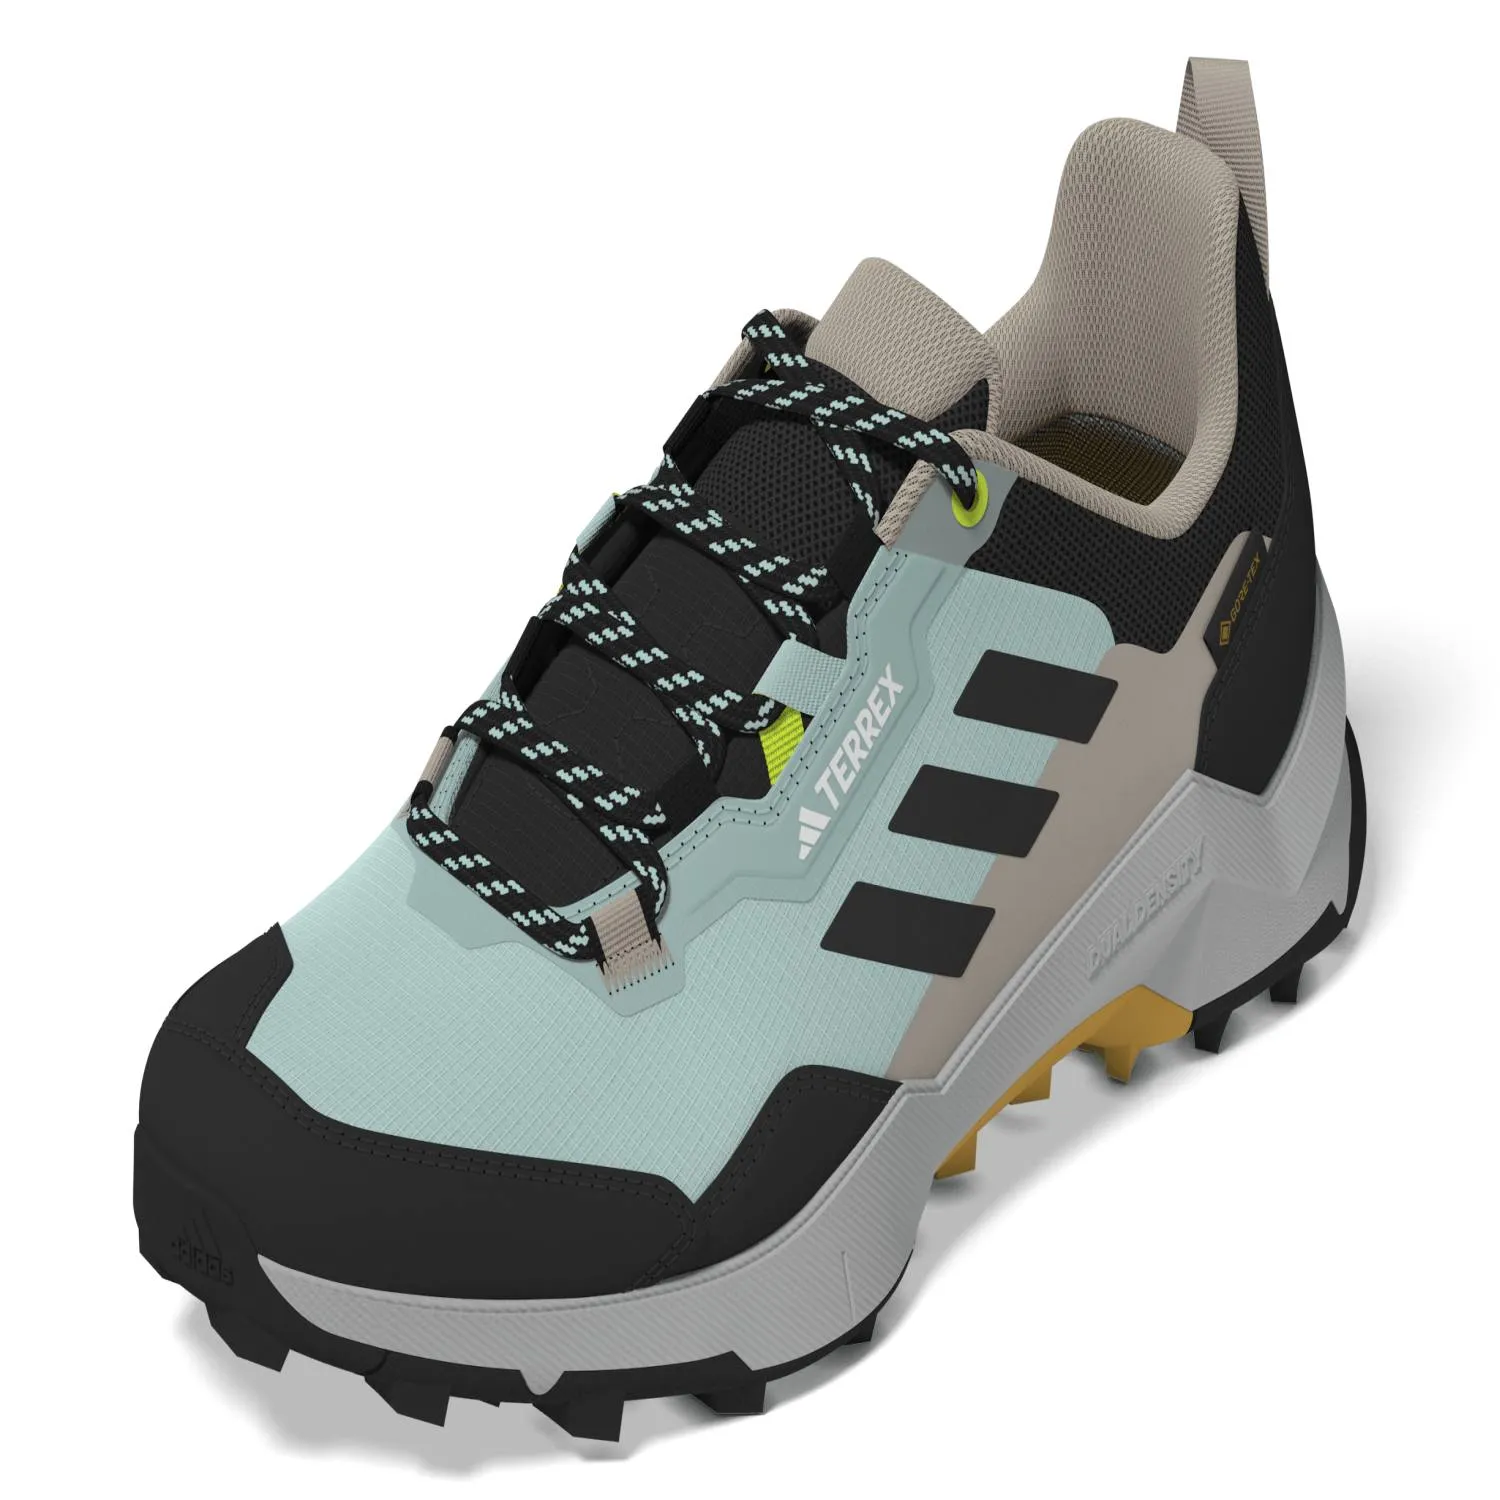 IF4861_13_FOOTWEAR_3D - Rendering_Side Lateral Left View_white.jpg